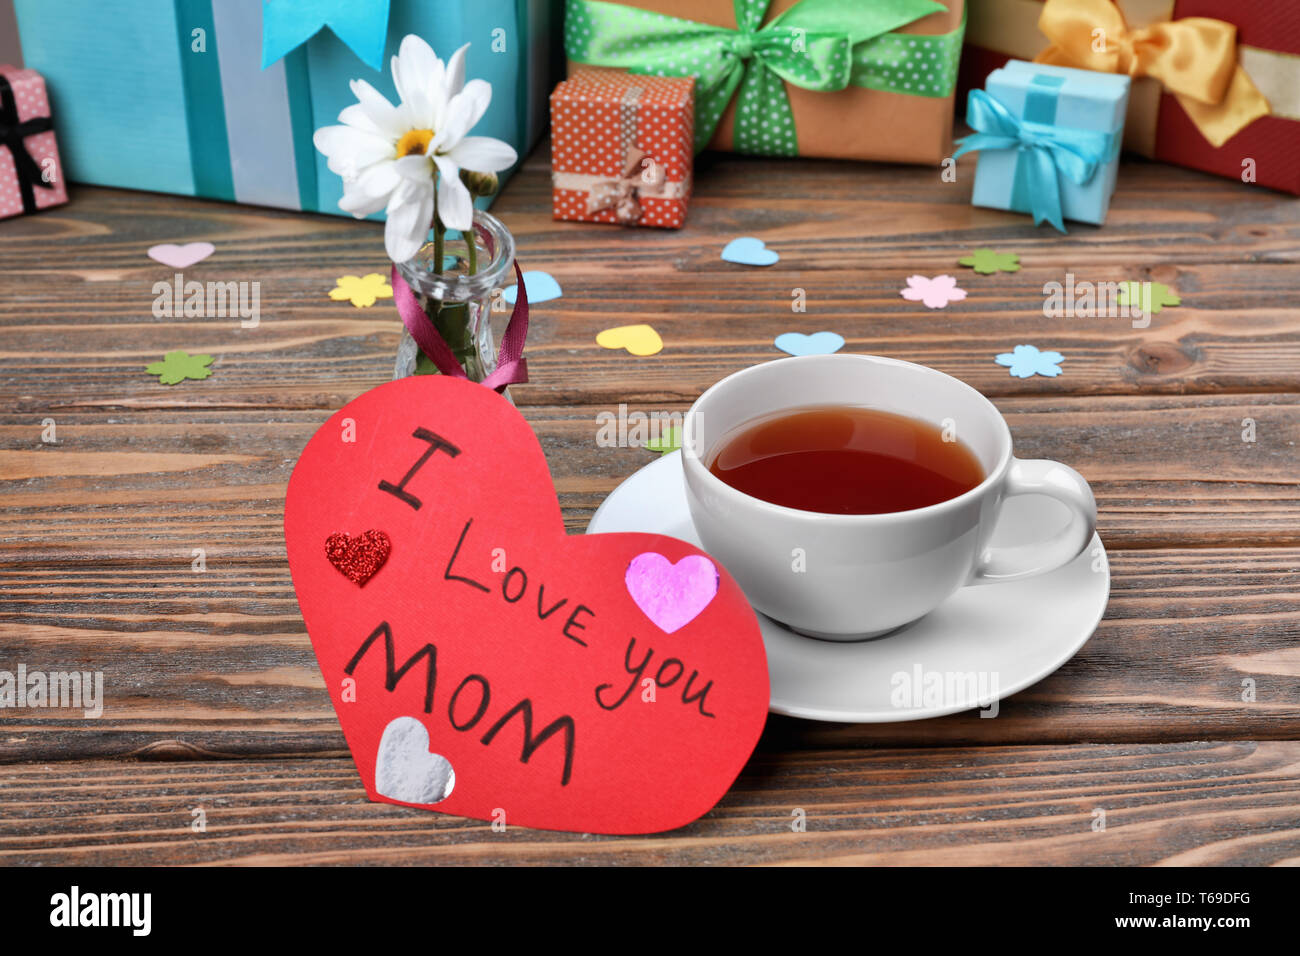 https://c8.alamy.com/comp/T69DFG/cup-of-tea-and-card-with-words-i-love-you-mom-on-table-mothers-day-celebration-T69DFG.jpg